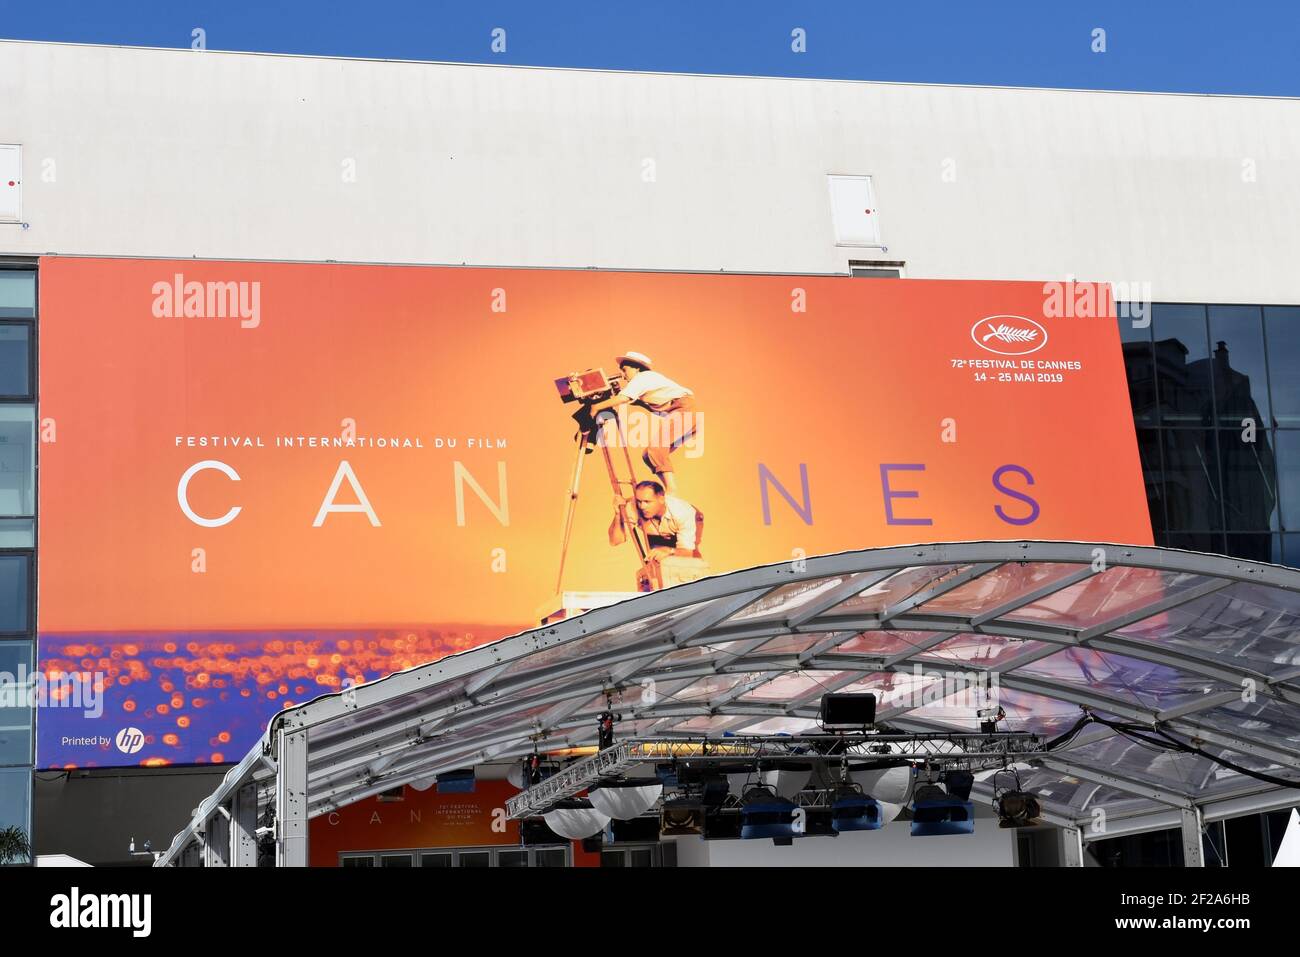 France, french riviera, Cannes, the official poster for the 72th International Film Festival, the artist chosen for this edition is Agnès VARDA. Stock Photo